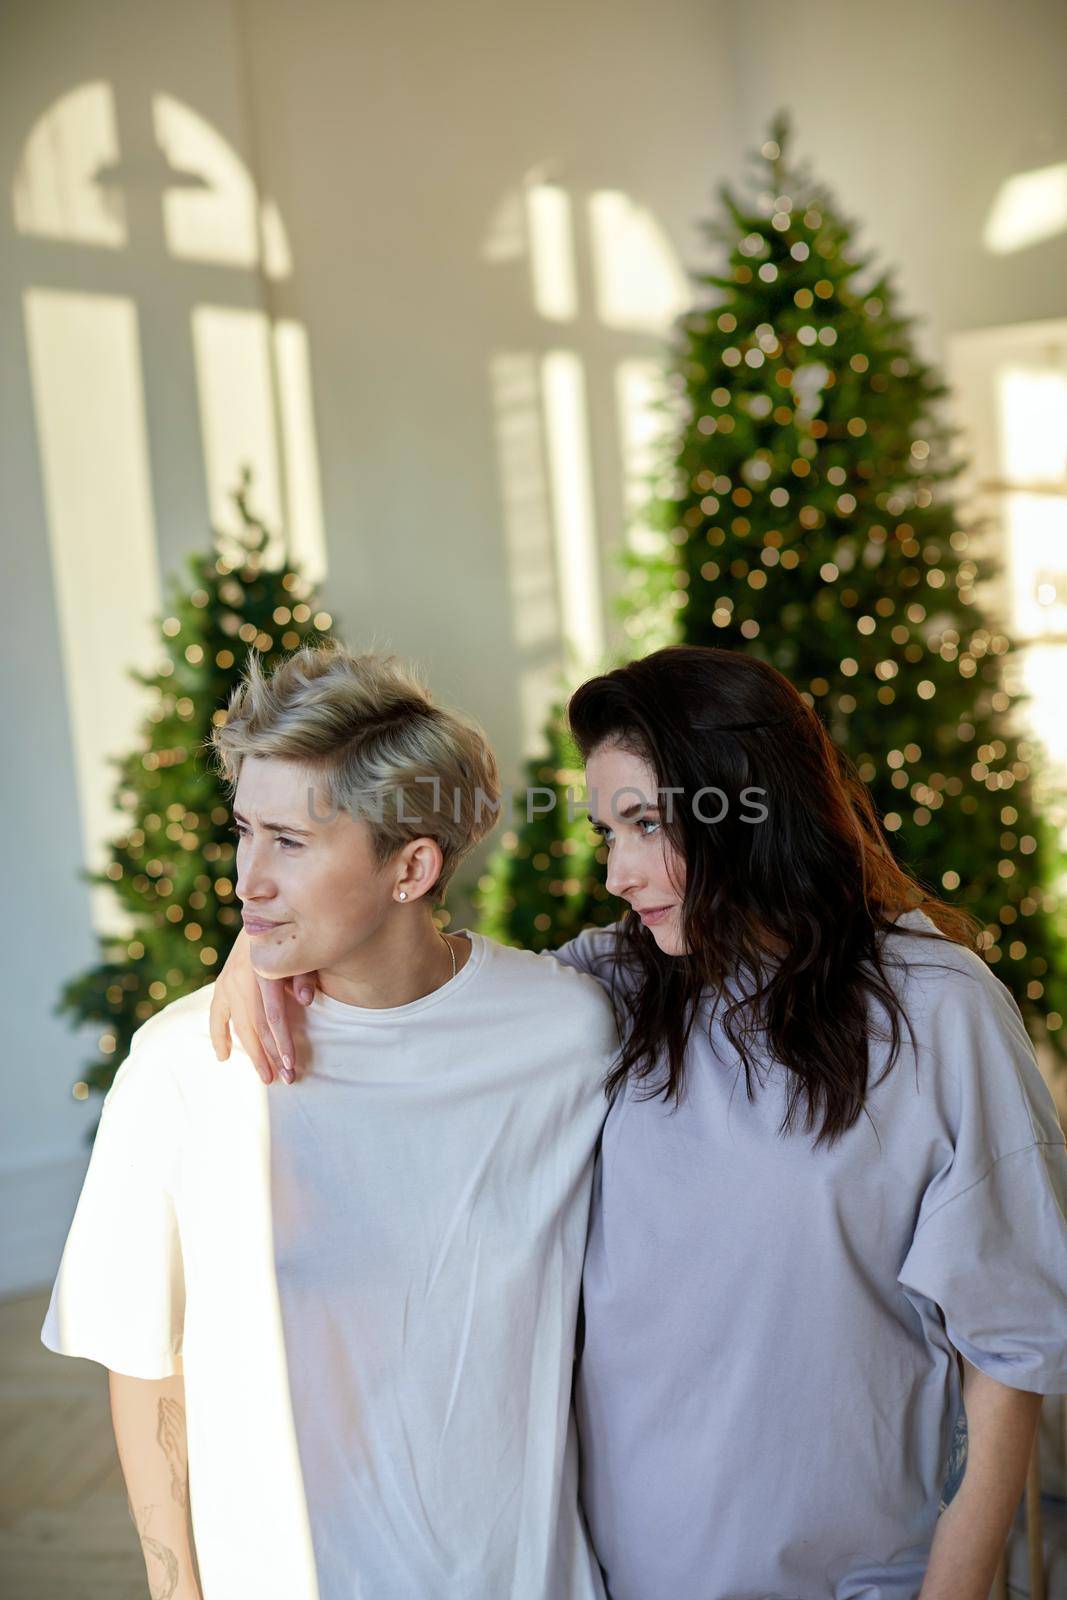 Same sex partners embracing each other while standing against coniferous tree decorated with garlands and looking away with interest